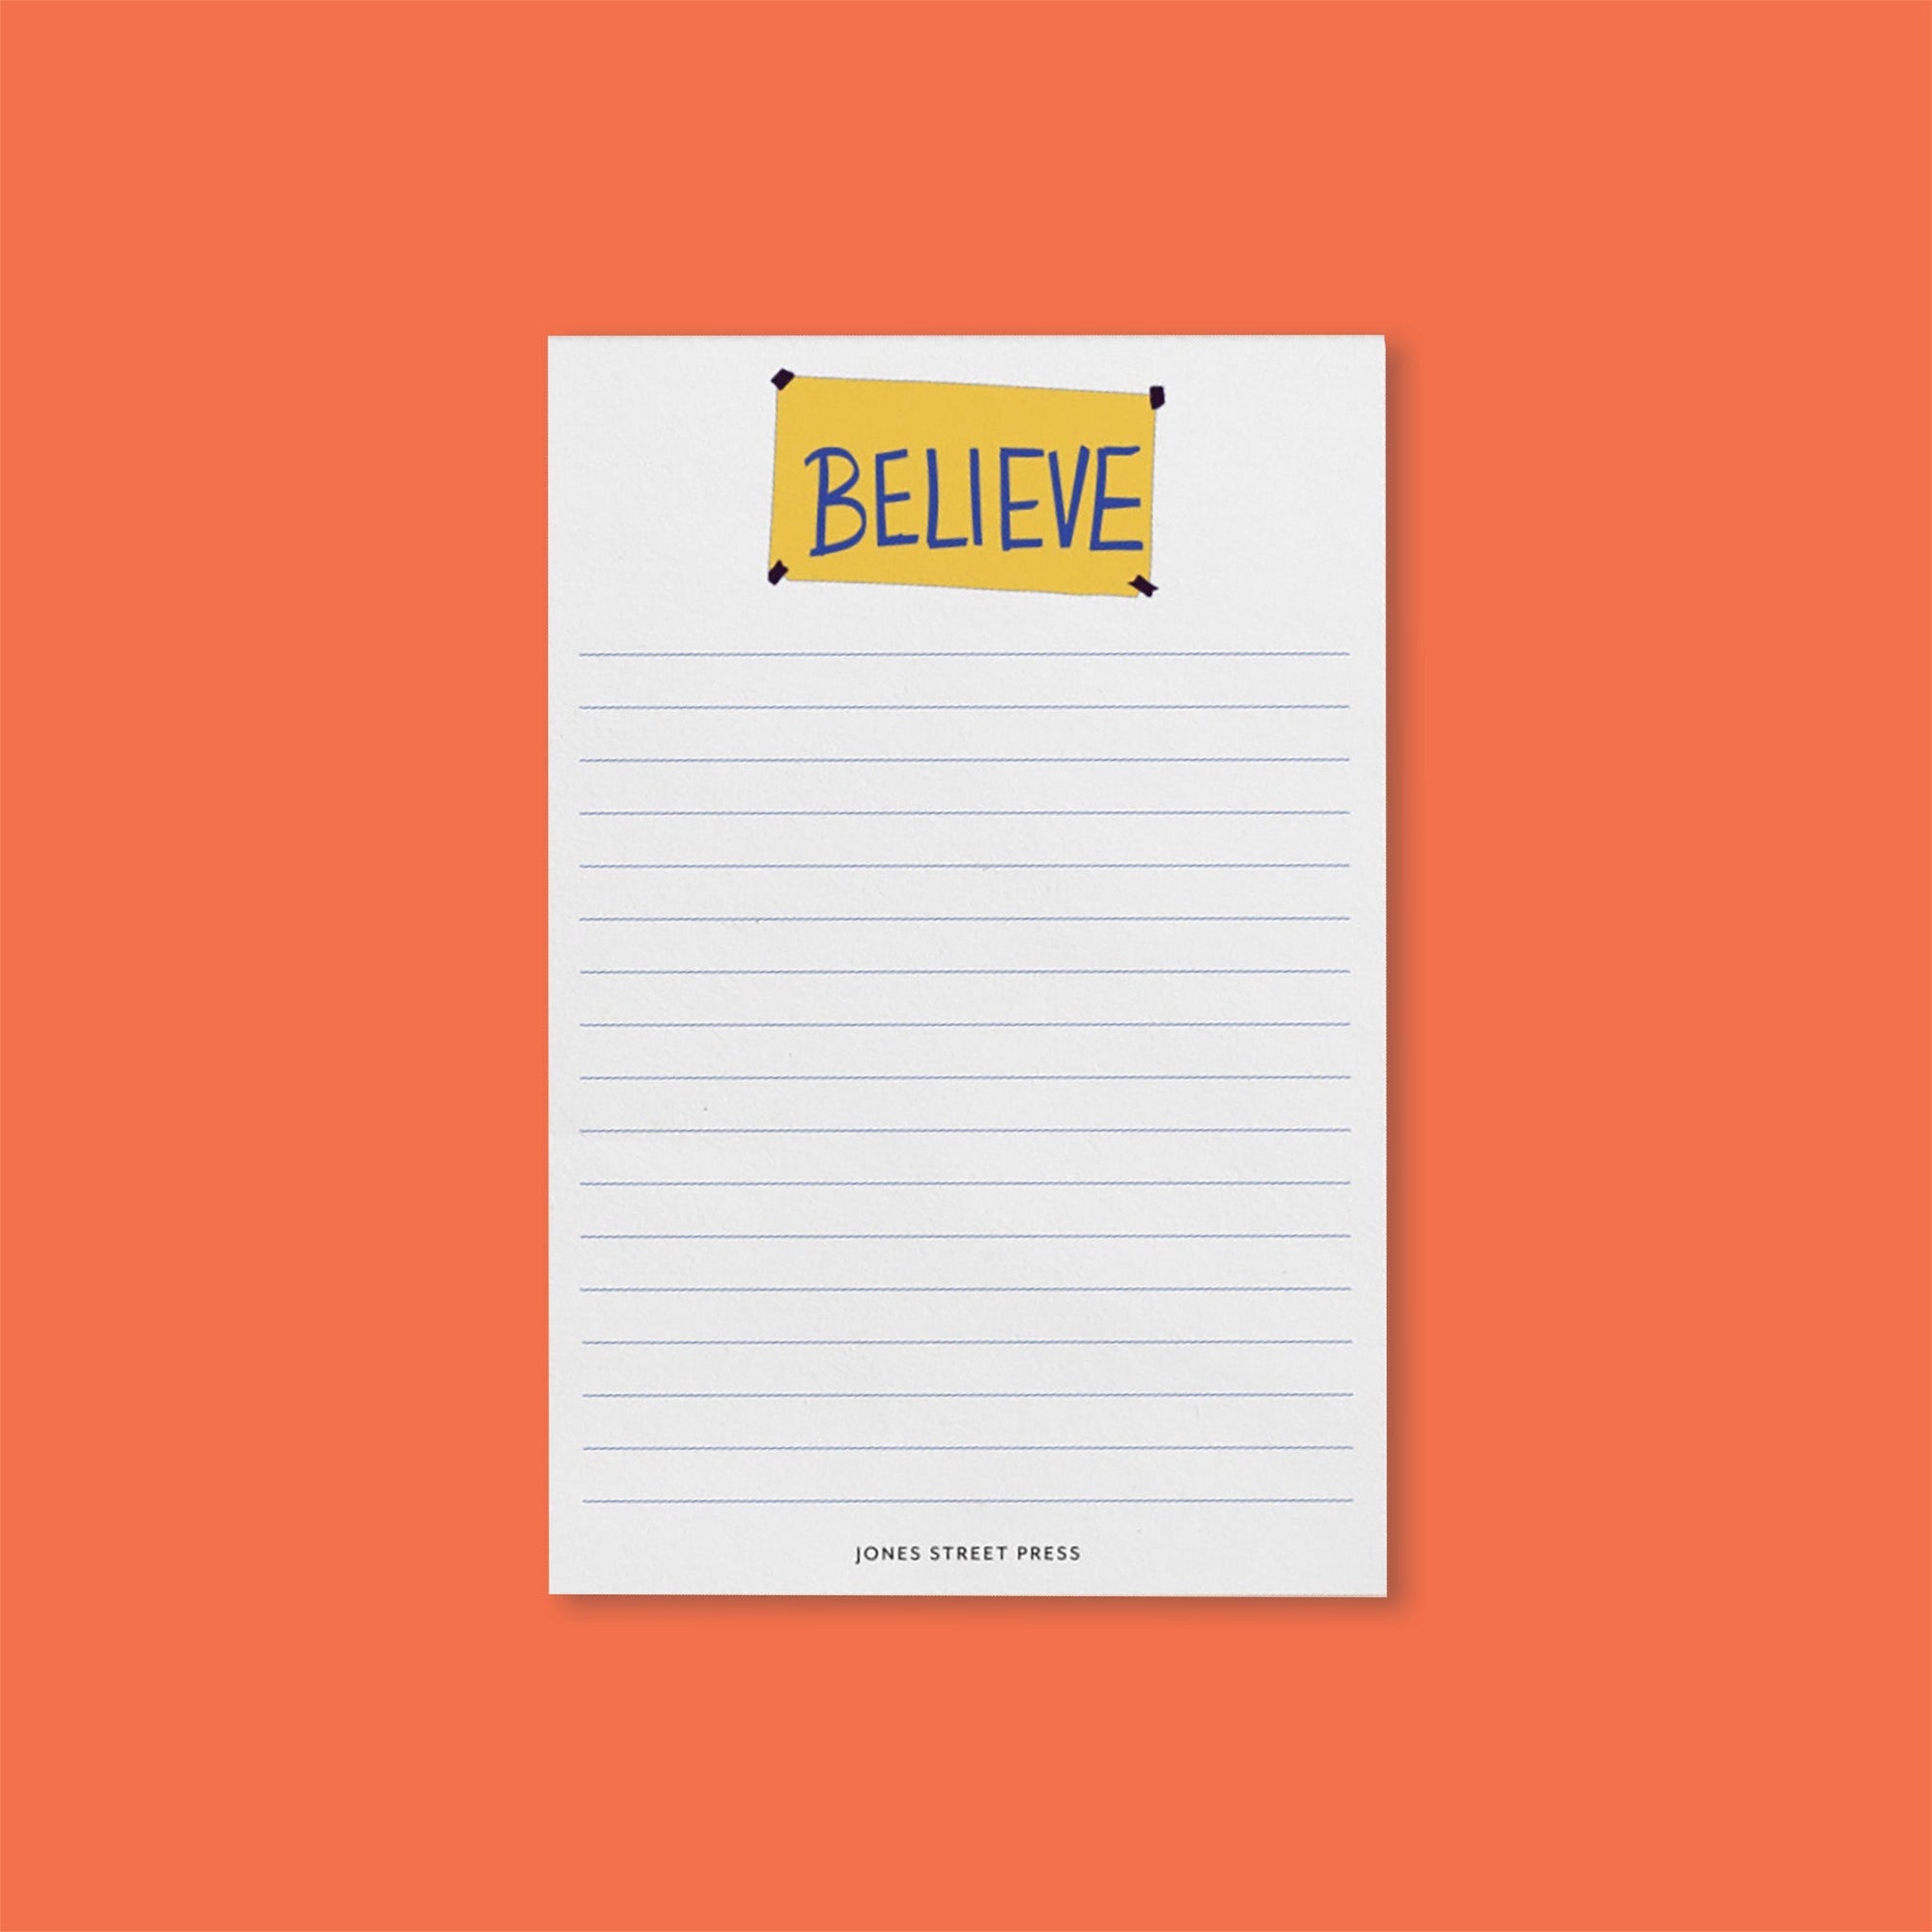 On an orangey-red background sits a notepad. This Ted Lasso inspired white notepad has blue lines on it with an illustration of a yellow "BELIEVE" banner.